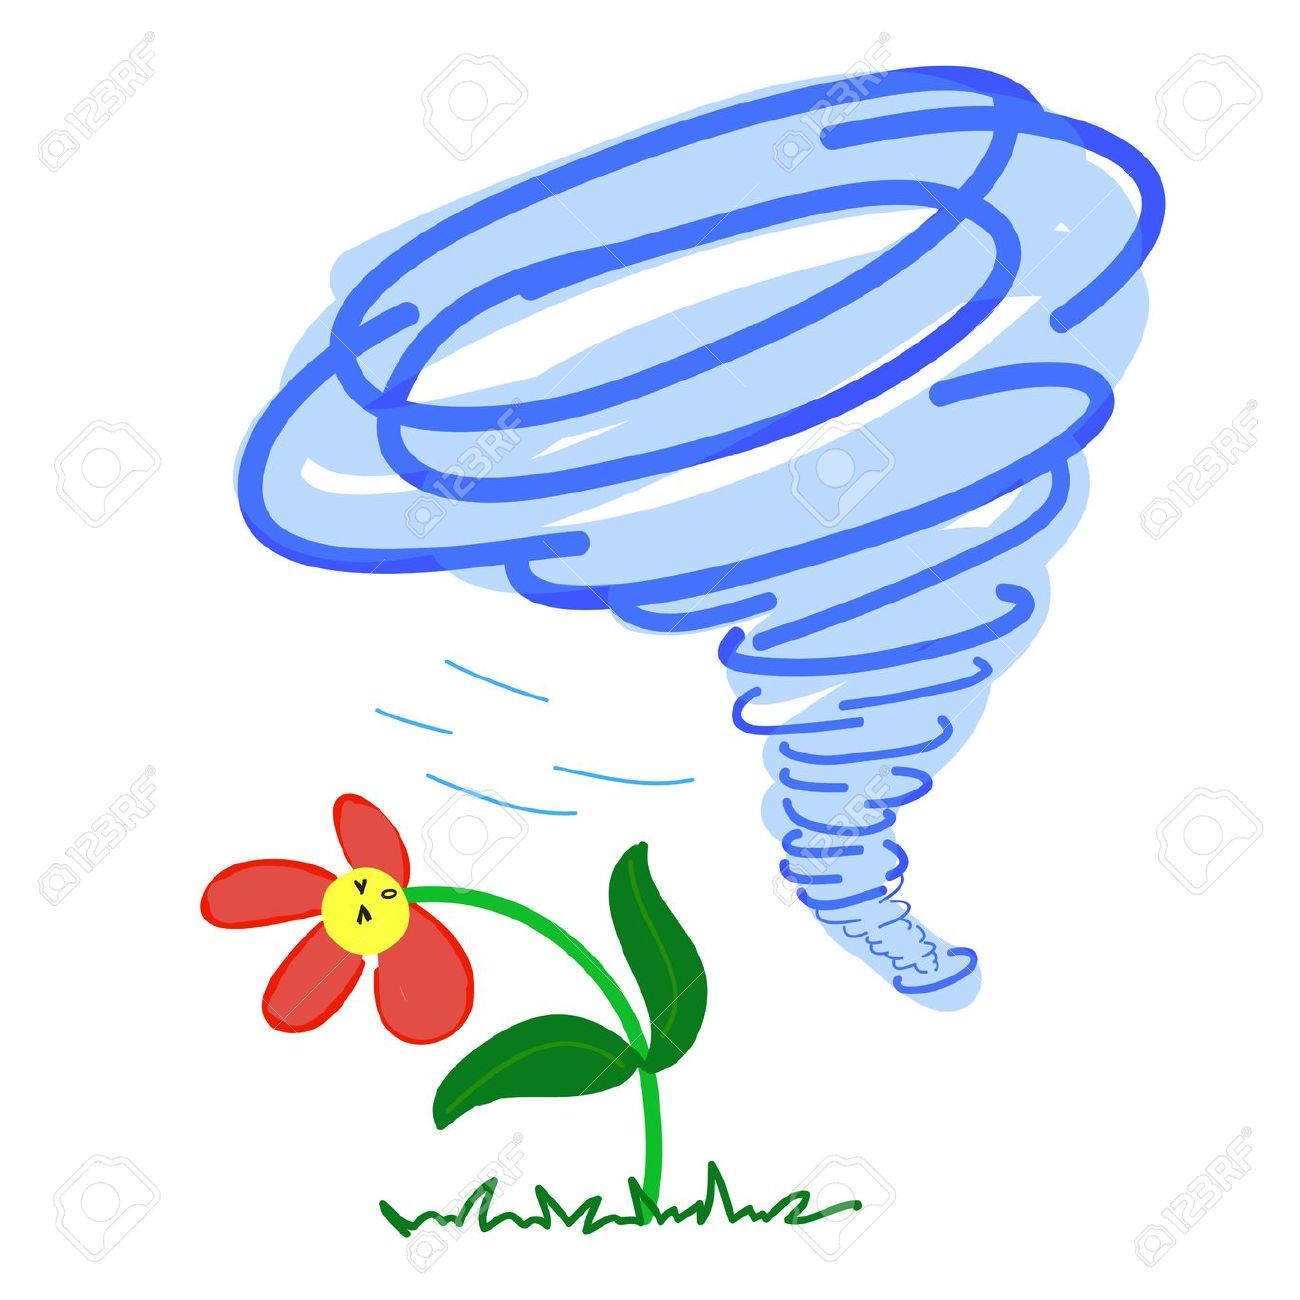 Flower In A Storm On White Background Royalty Free Cliparts.